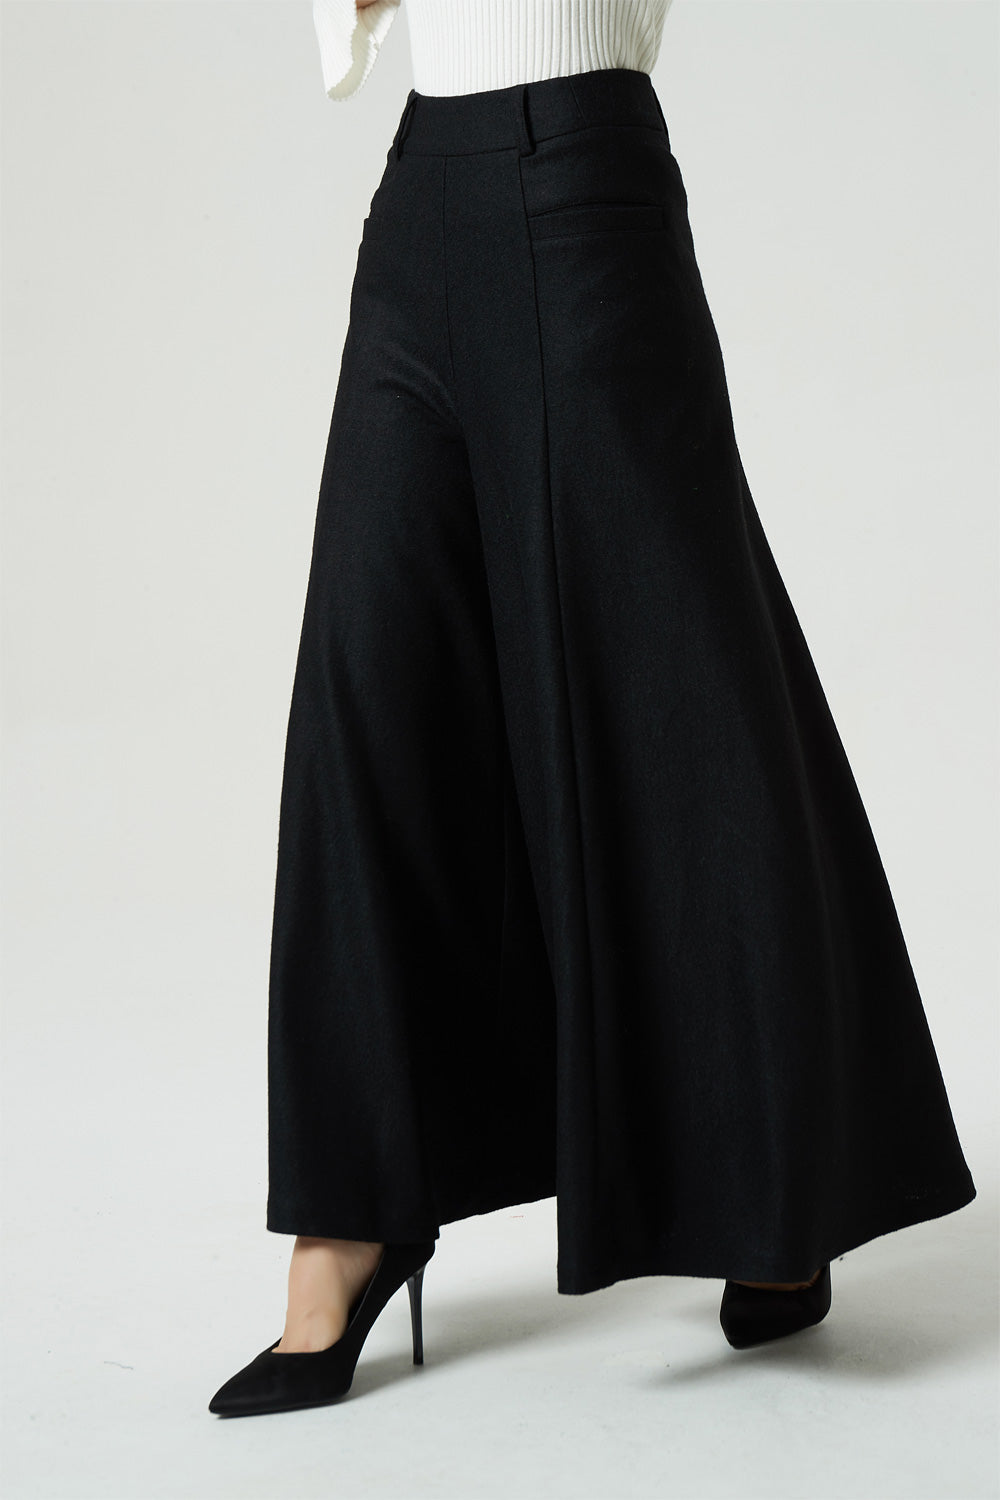 Elegant High Waist Wide Leg Flare Pants For Women Vintage Spring Ladies  Wide Leg Trousers With Solid Zipper, Perfect For Office And Casual Wear  From Shuishu, $21.95 | DHgate.Com